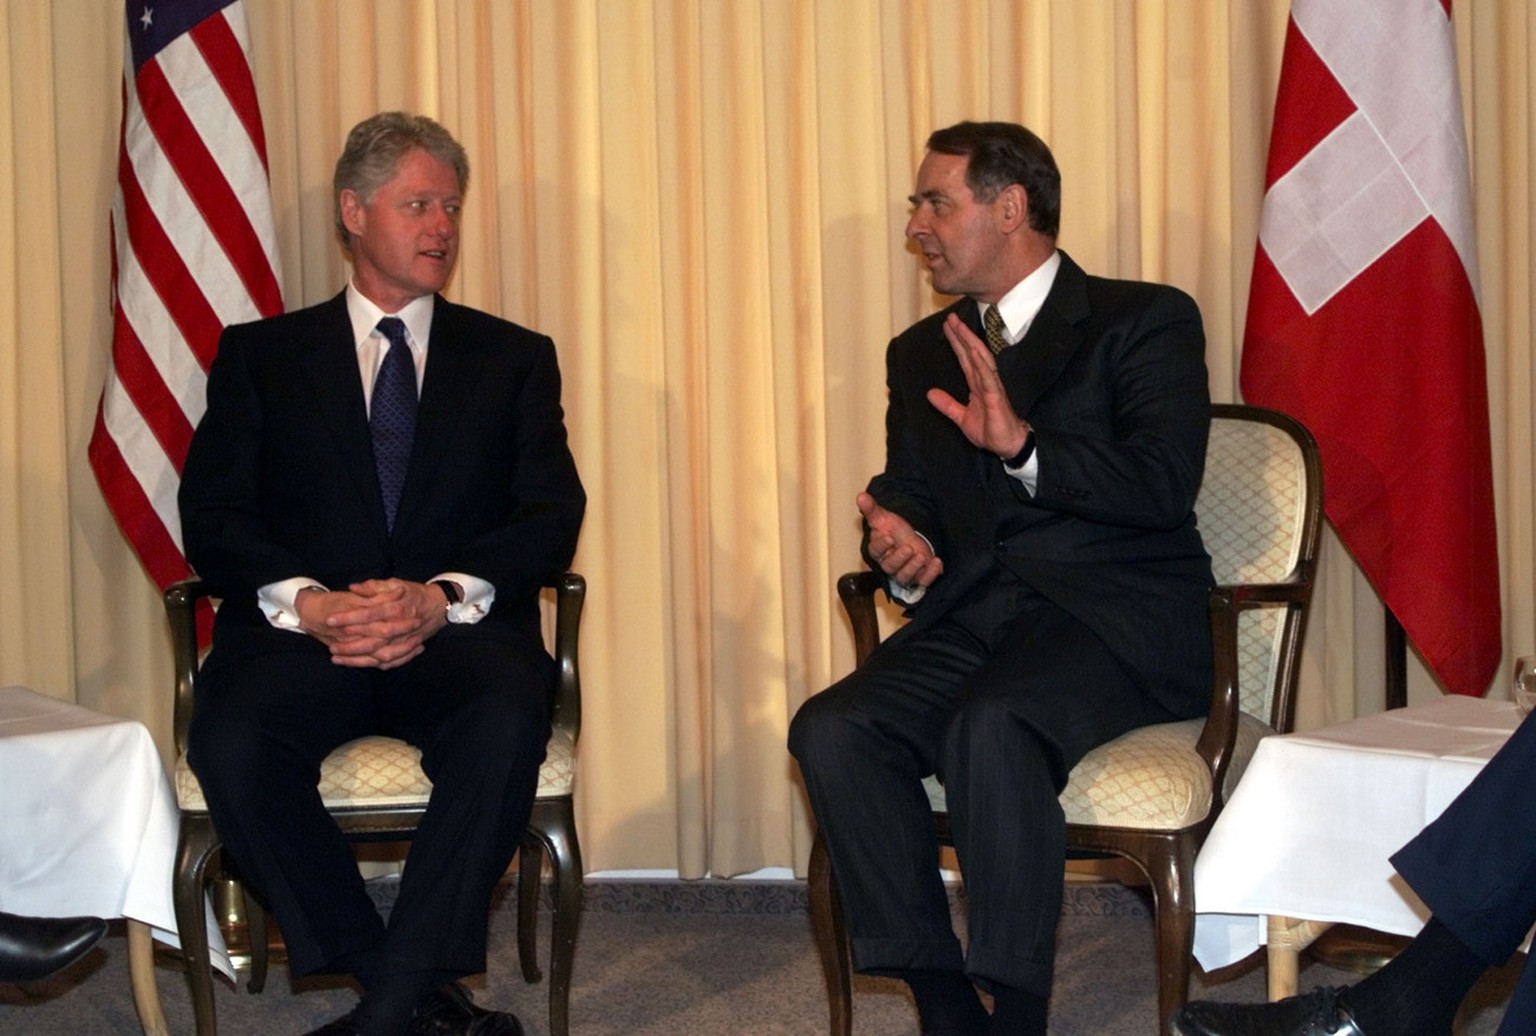 U.S. President Bill Clinton meets with Swiss President Adolf Ogi at the Belvedere Hotel in Davos, Saturday, January 29, 2000. Businessmen, scholars and world leaders are gathering in this exclusive Sw ...